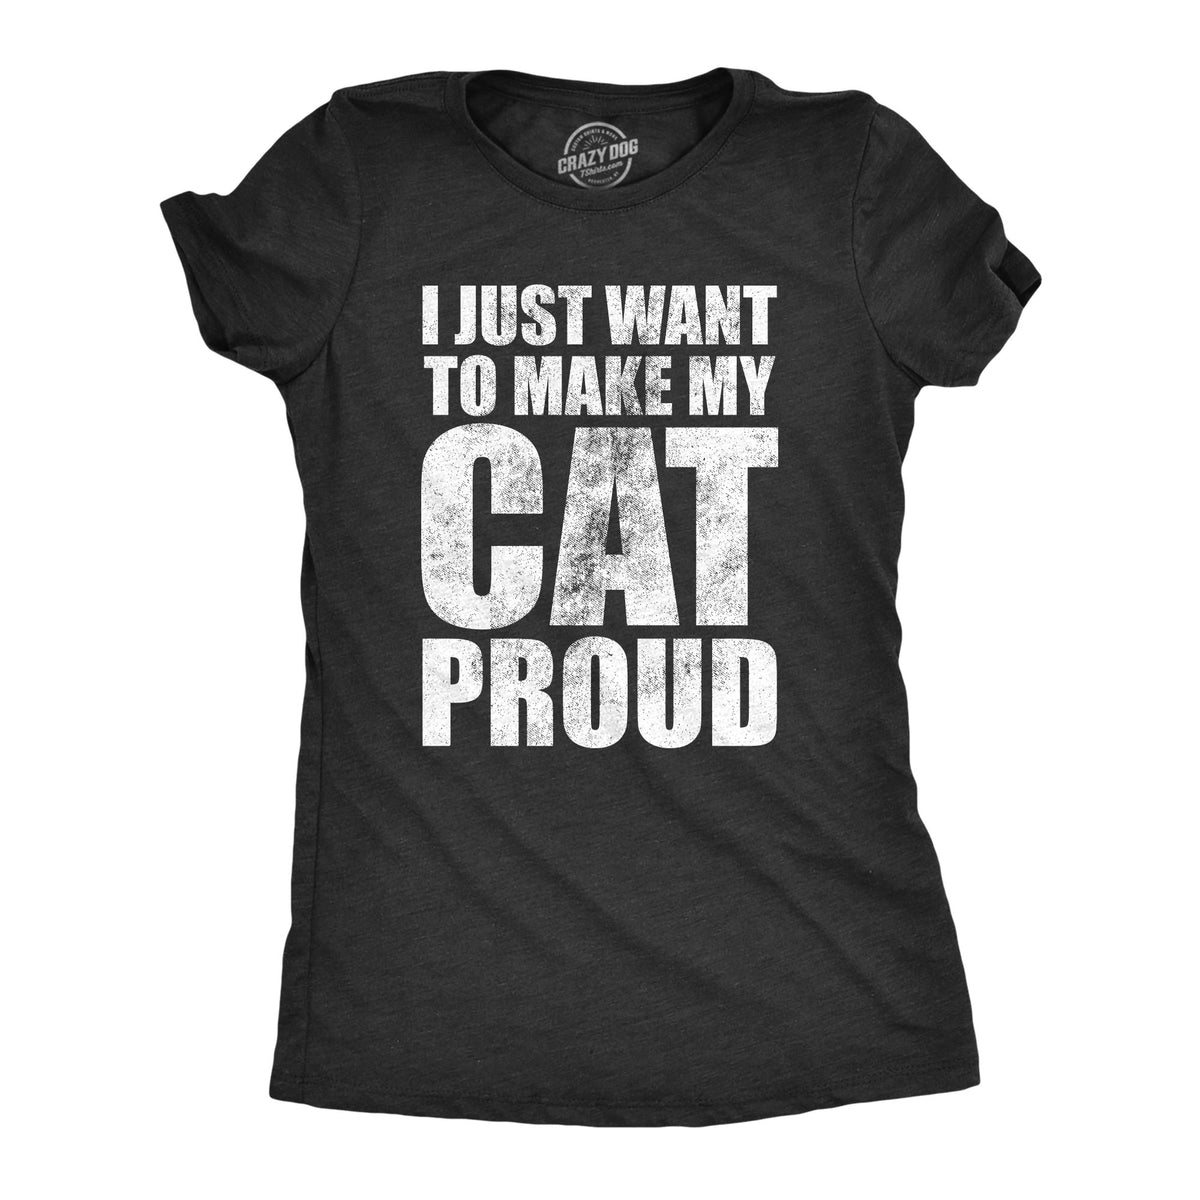 Funny Heather Black - CATPROUD I Just Want To Make My Cat Proud Womens T Shirt Nerdy Cat sarcastic Tee